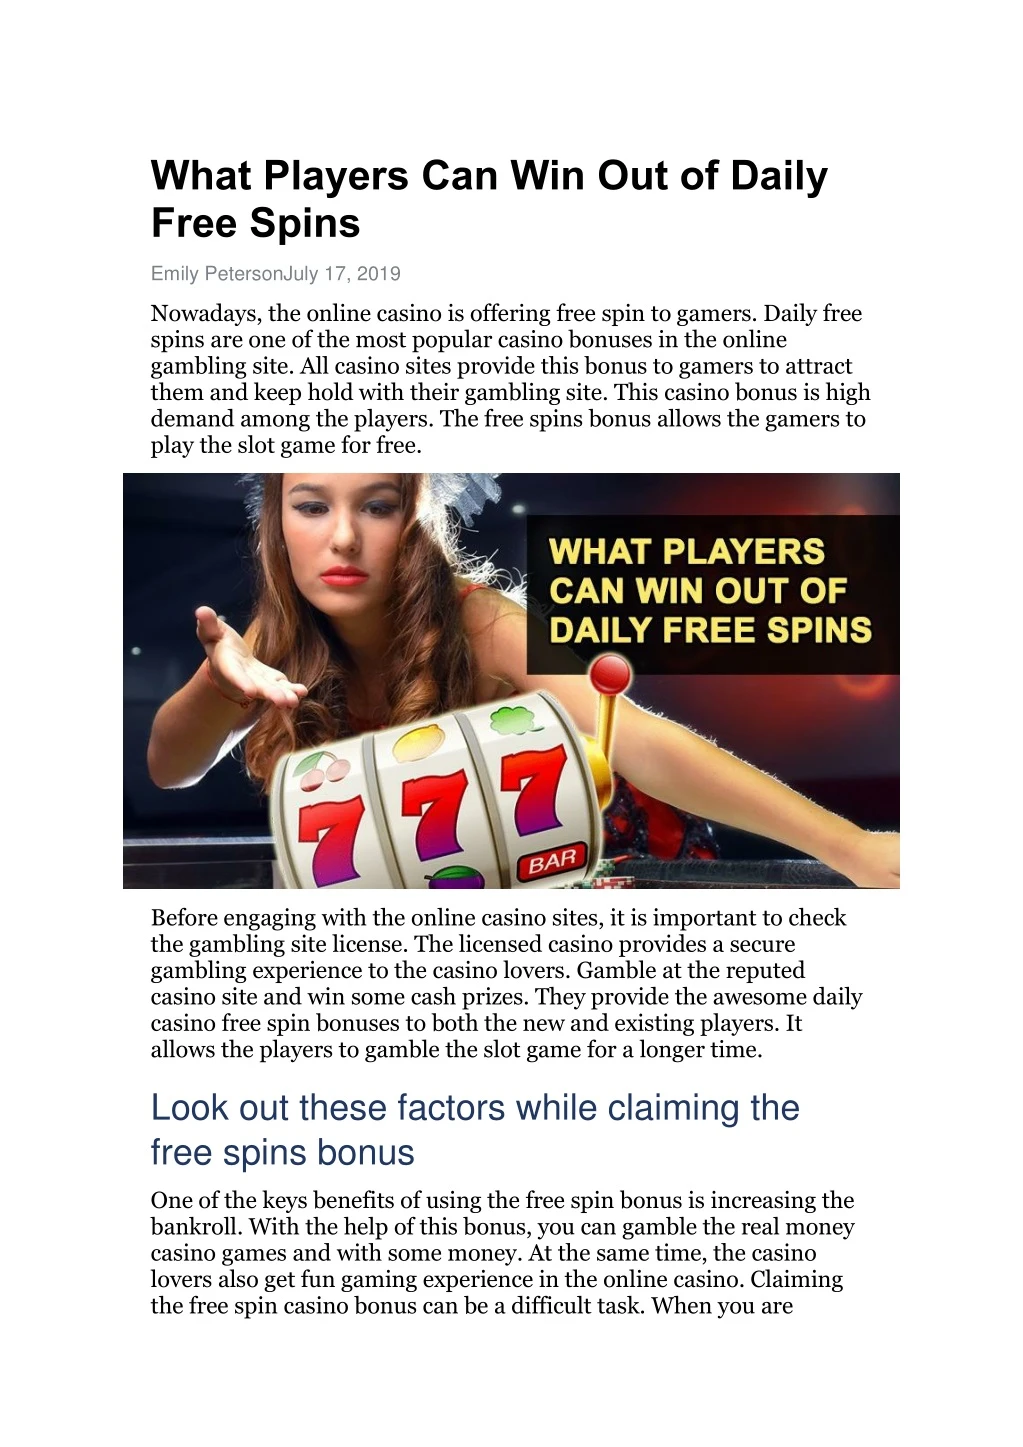 what players can win out of daily free spins